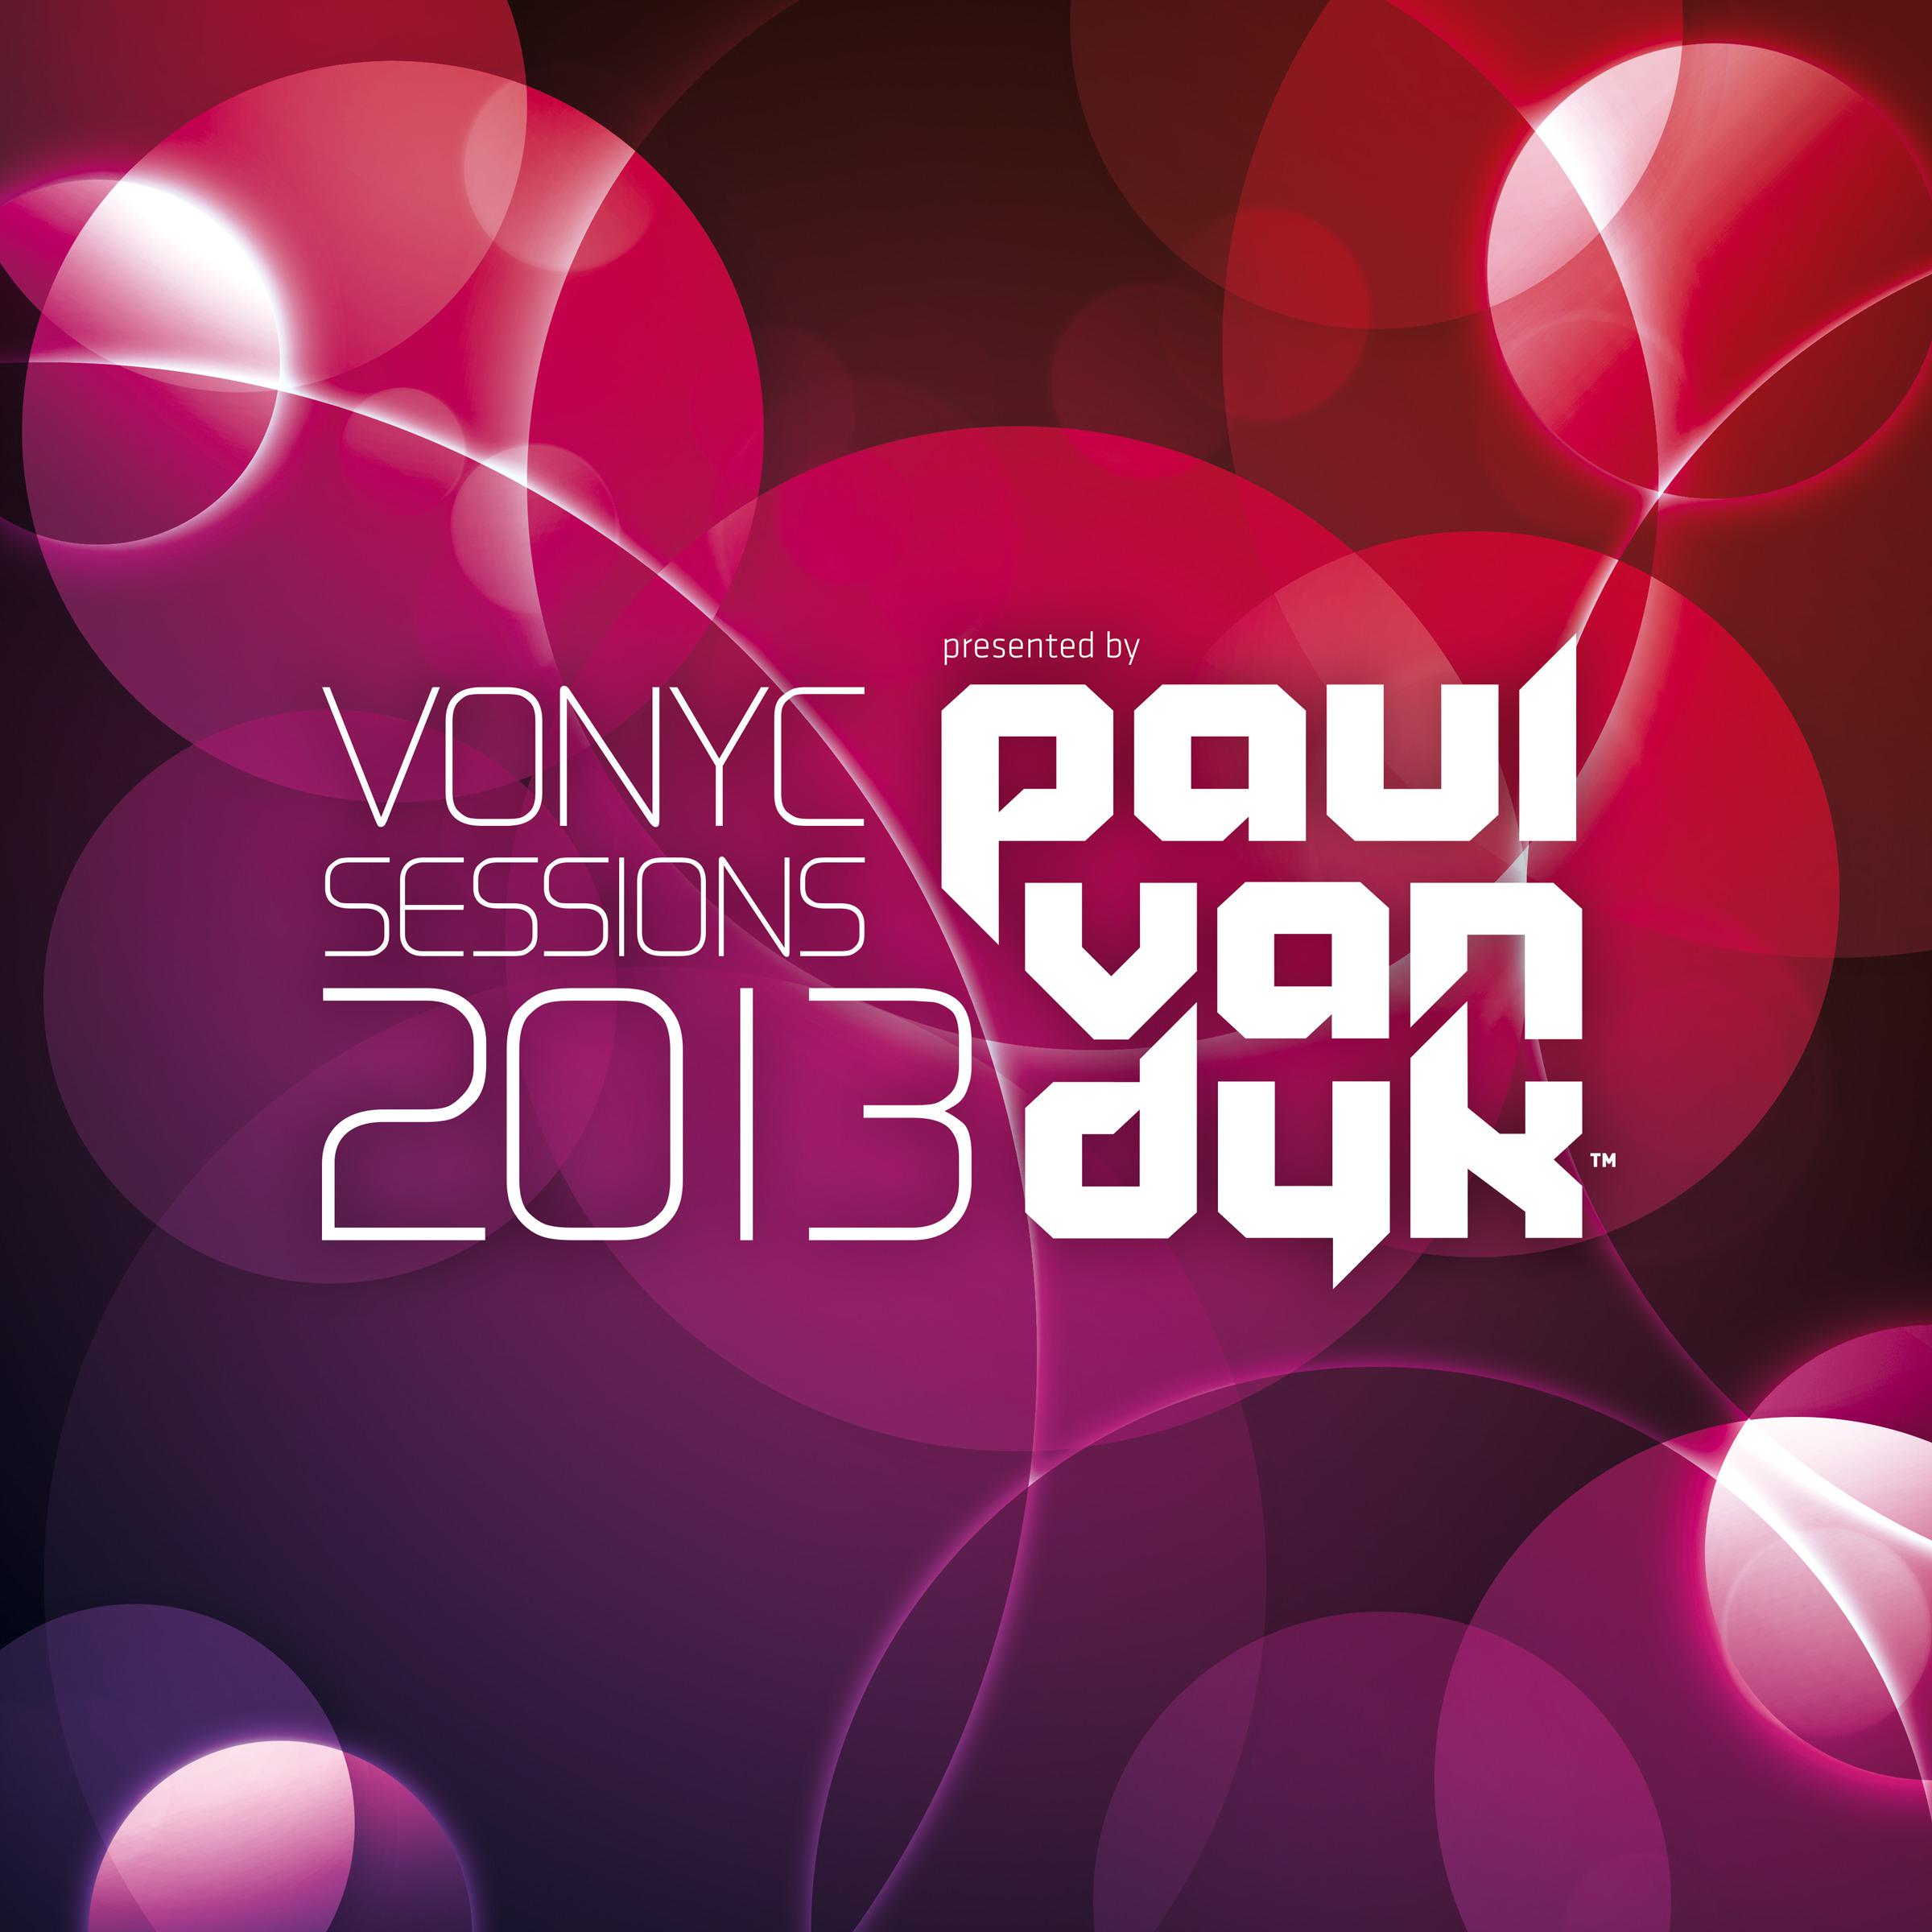 Various Artists - VONYC Sessions 2013 (Presented by Paul van Dyk) Full Continuous Mix, Pt. 1